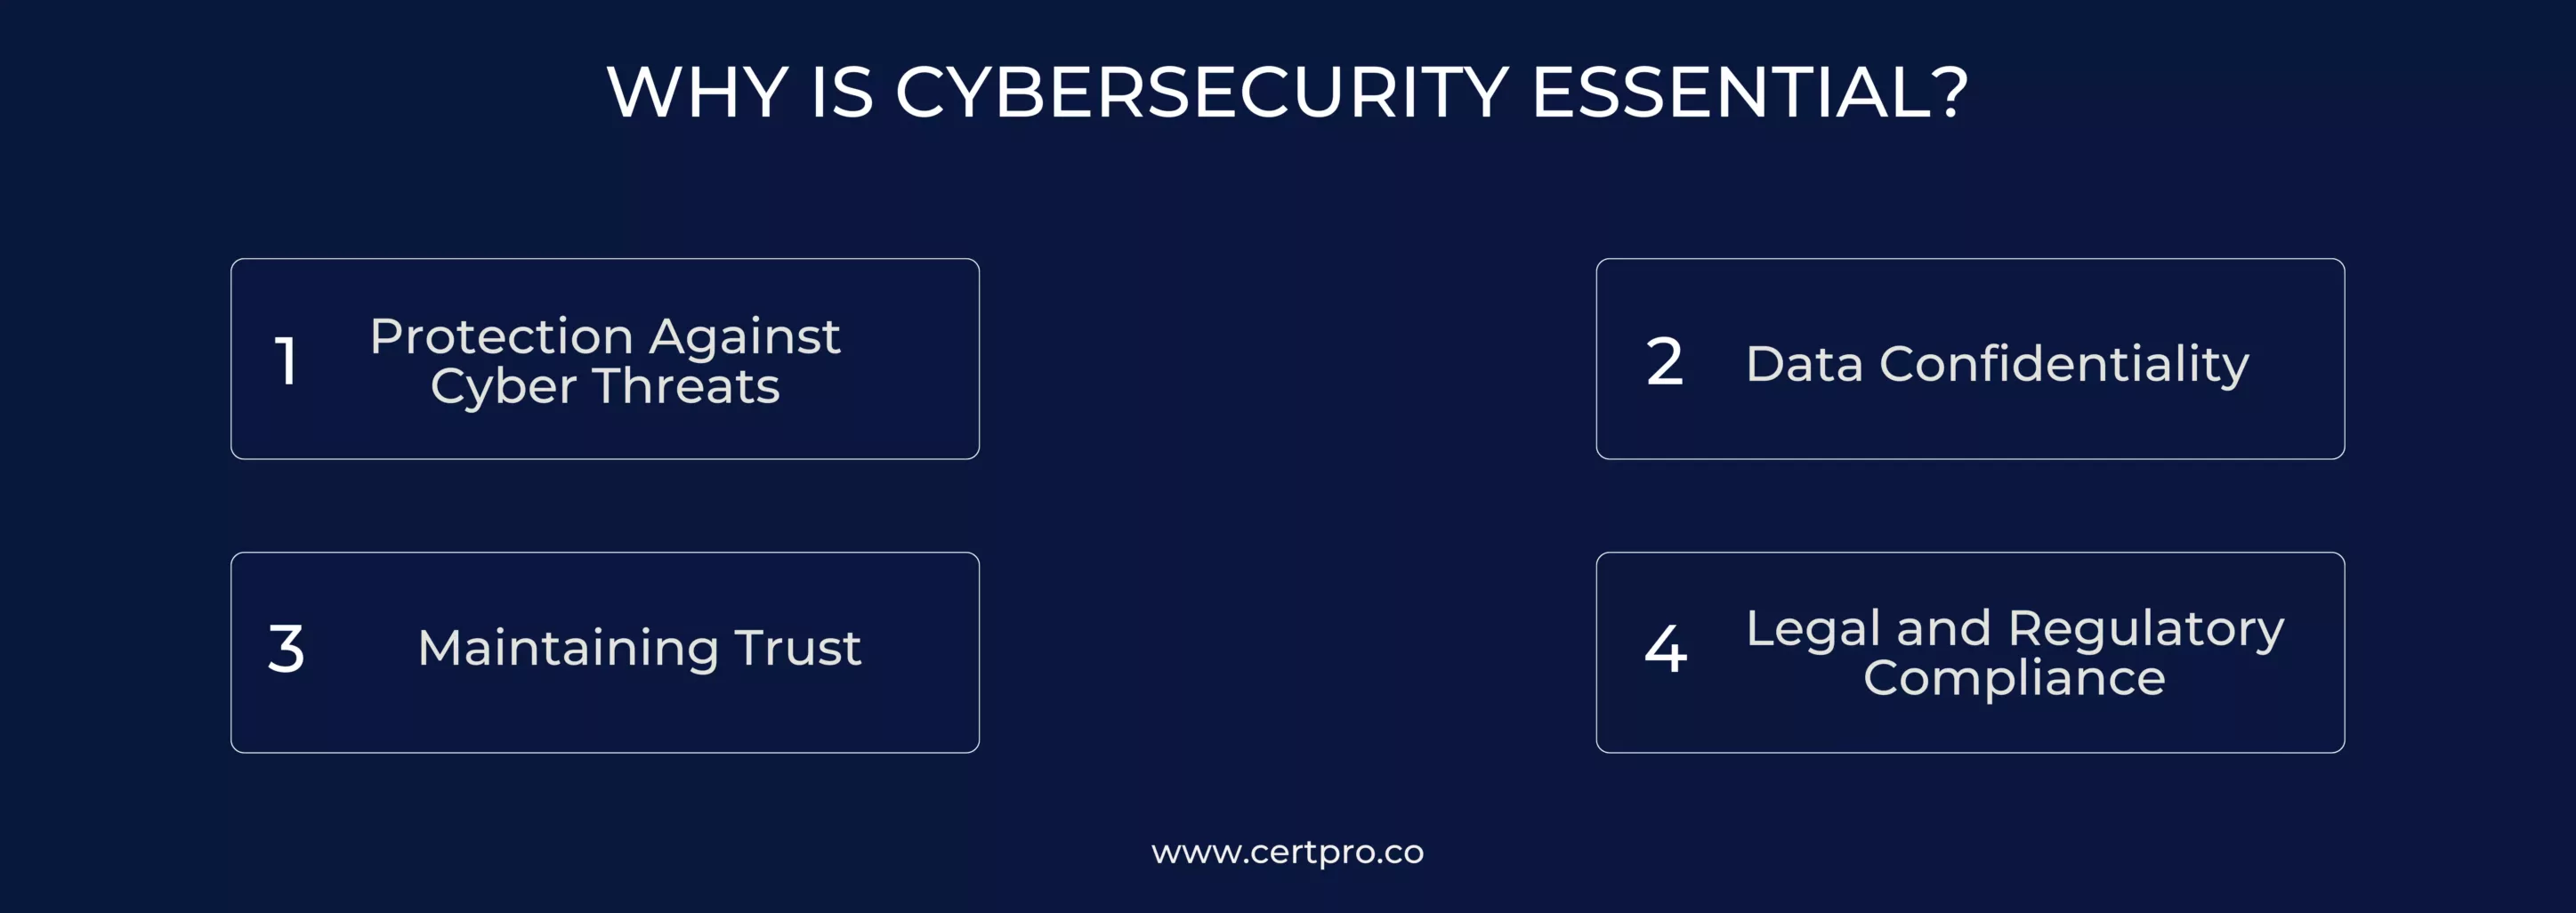 WHY IS CYBERSECURITY ESSENTIAL